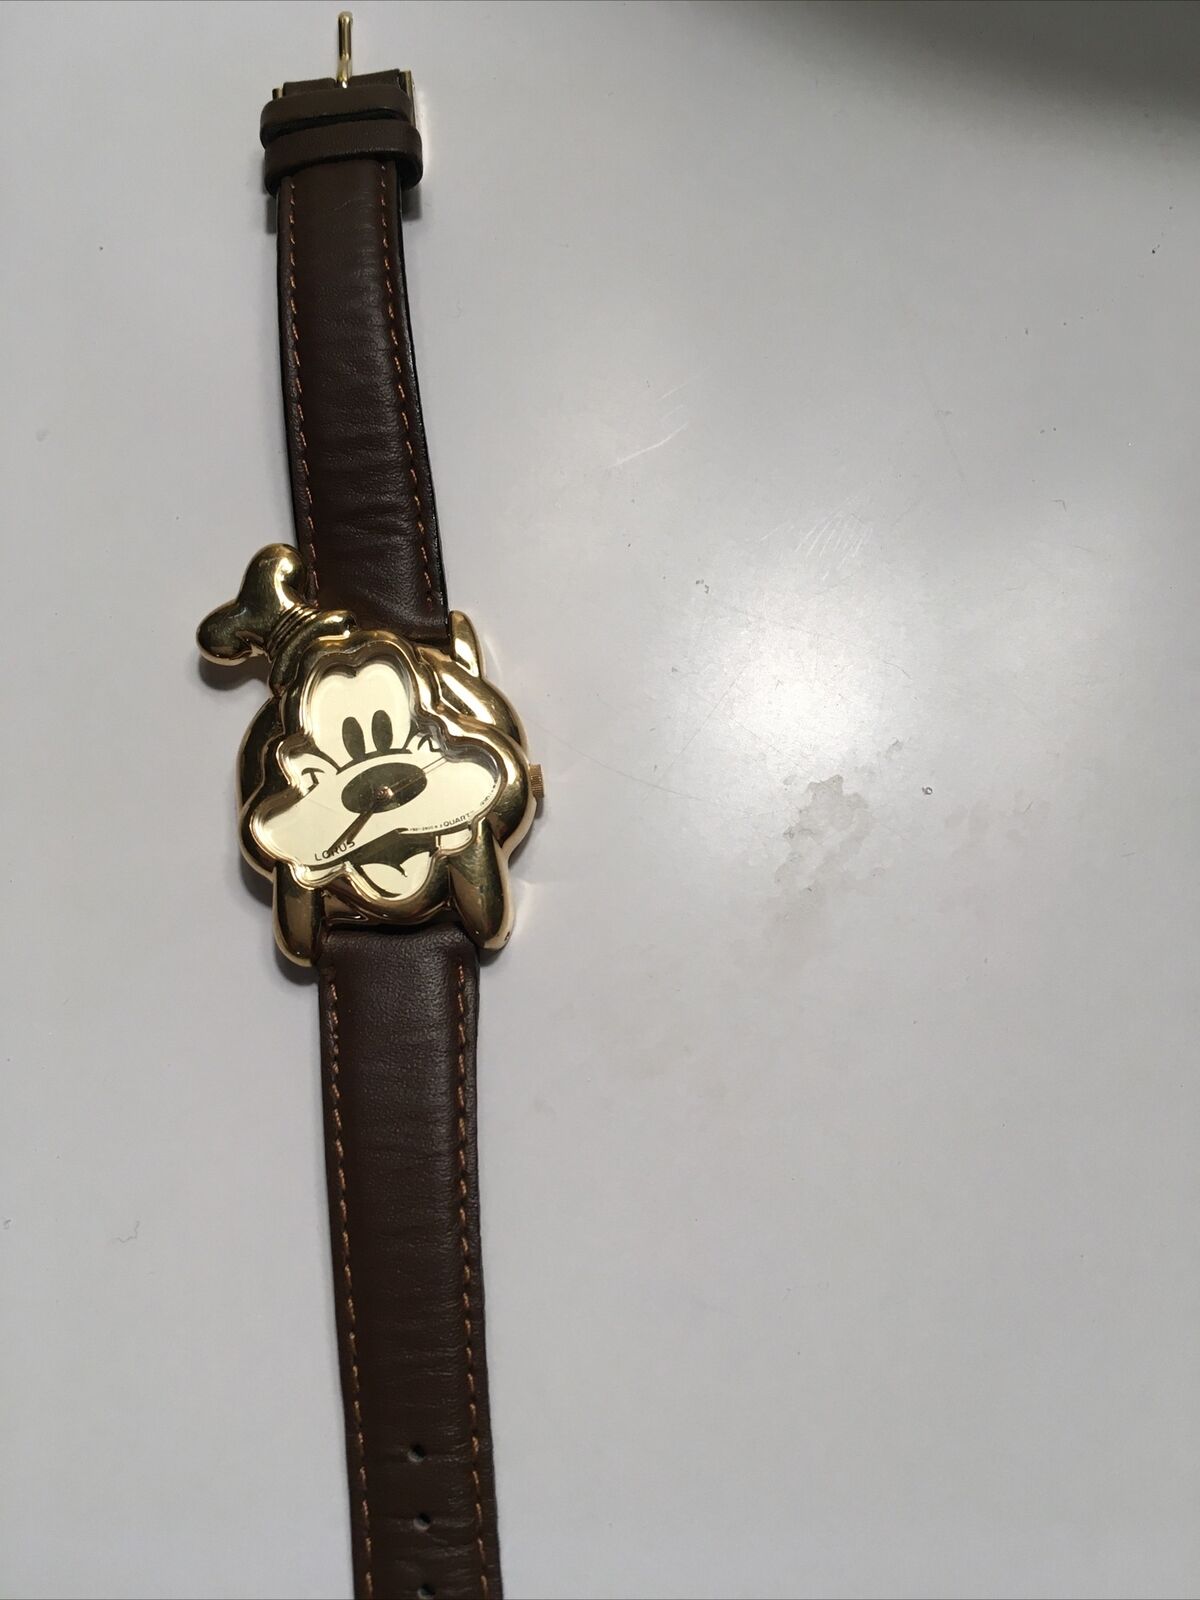 VINTAGE DISNEY LORUS GOOFY FACE GOLD TONE WATCH Made By Seiko